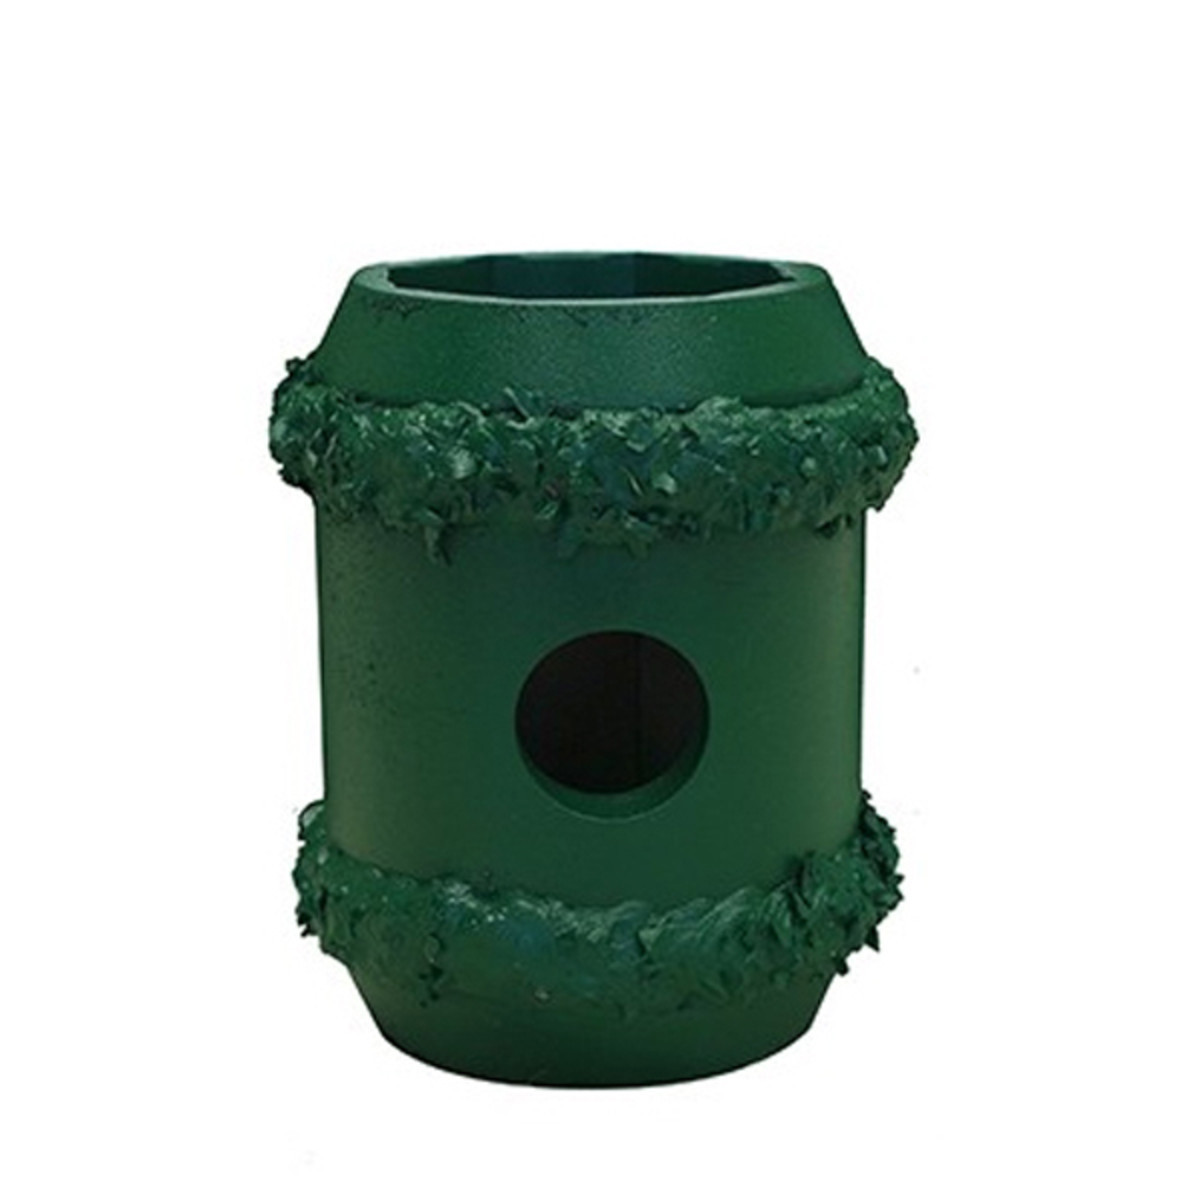 18 Great 6x6 Cylinder Vase 2022 free download 6x6 cylinder vase of products for hardfaced octagon collar dw ez 2